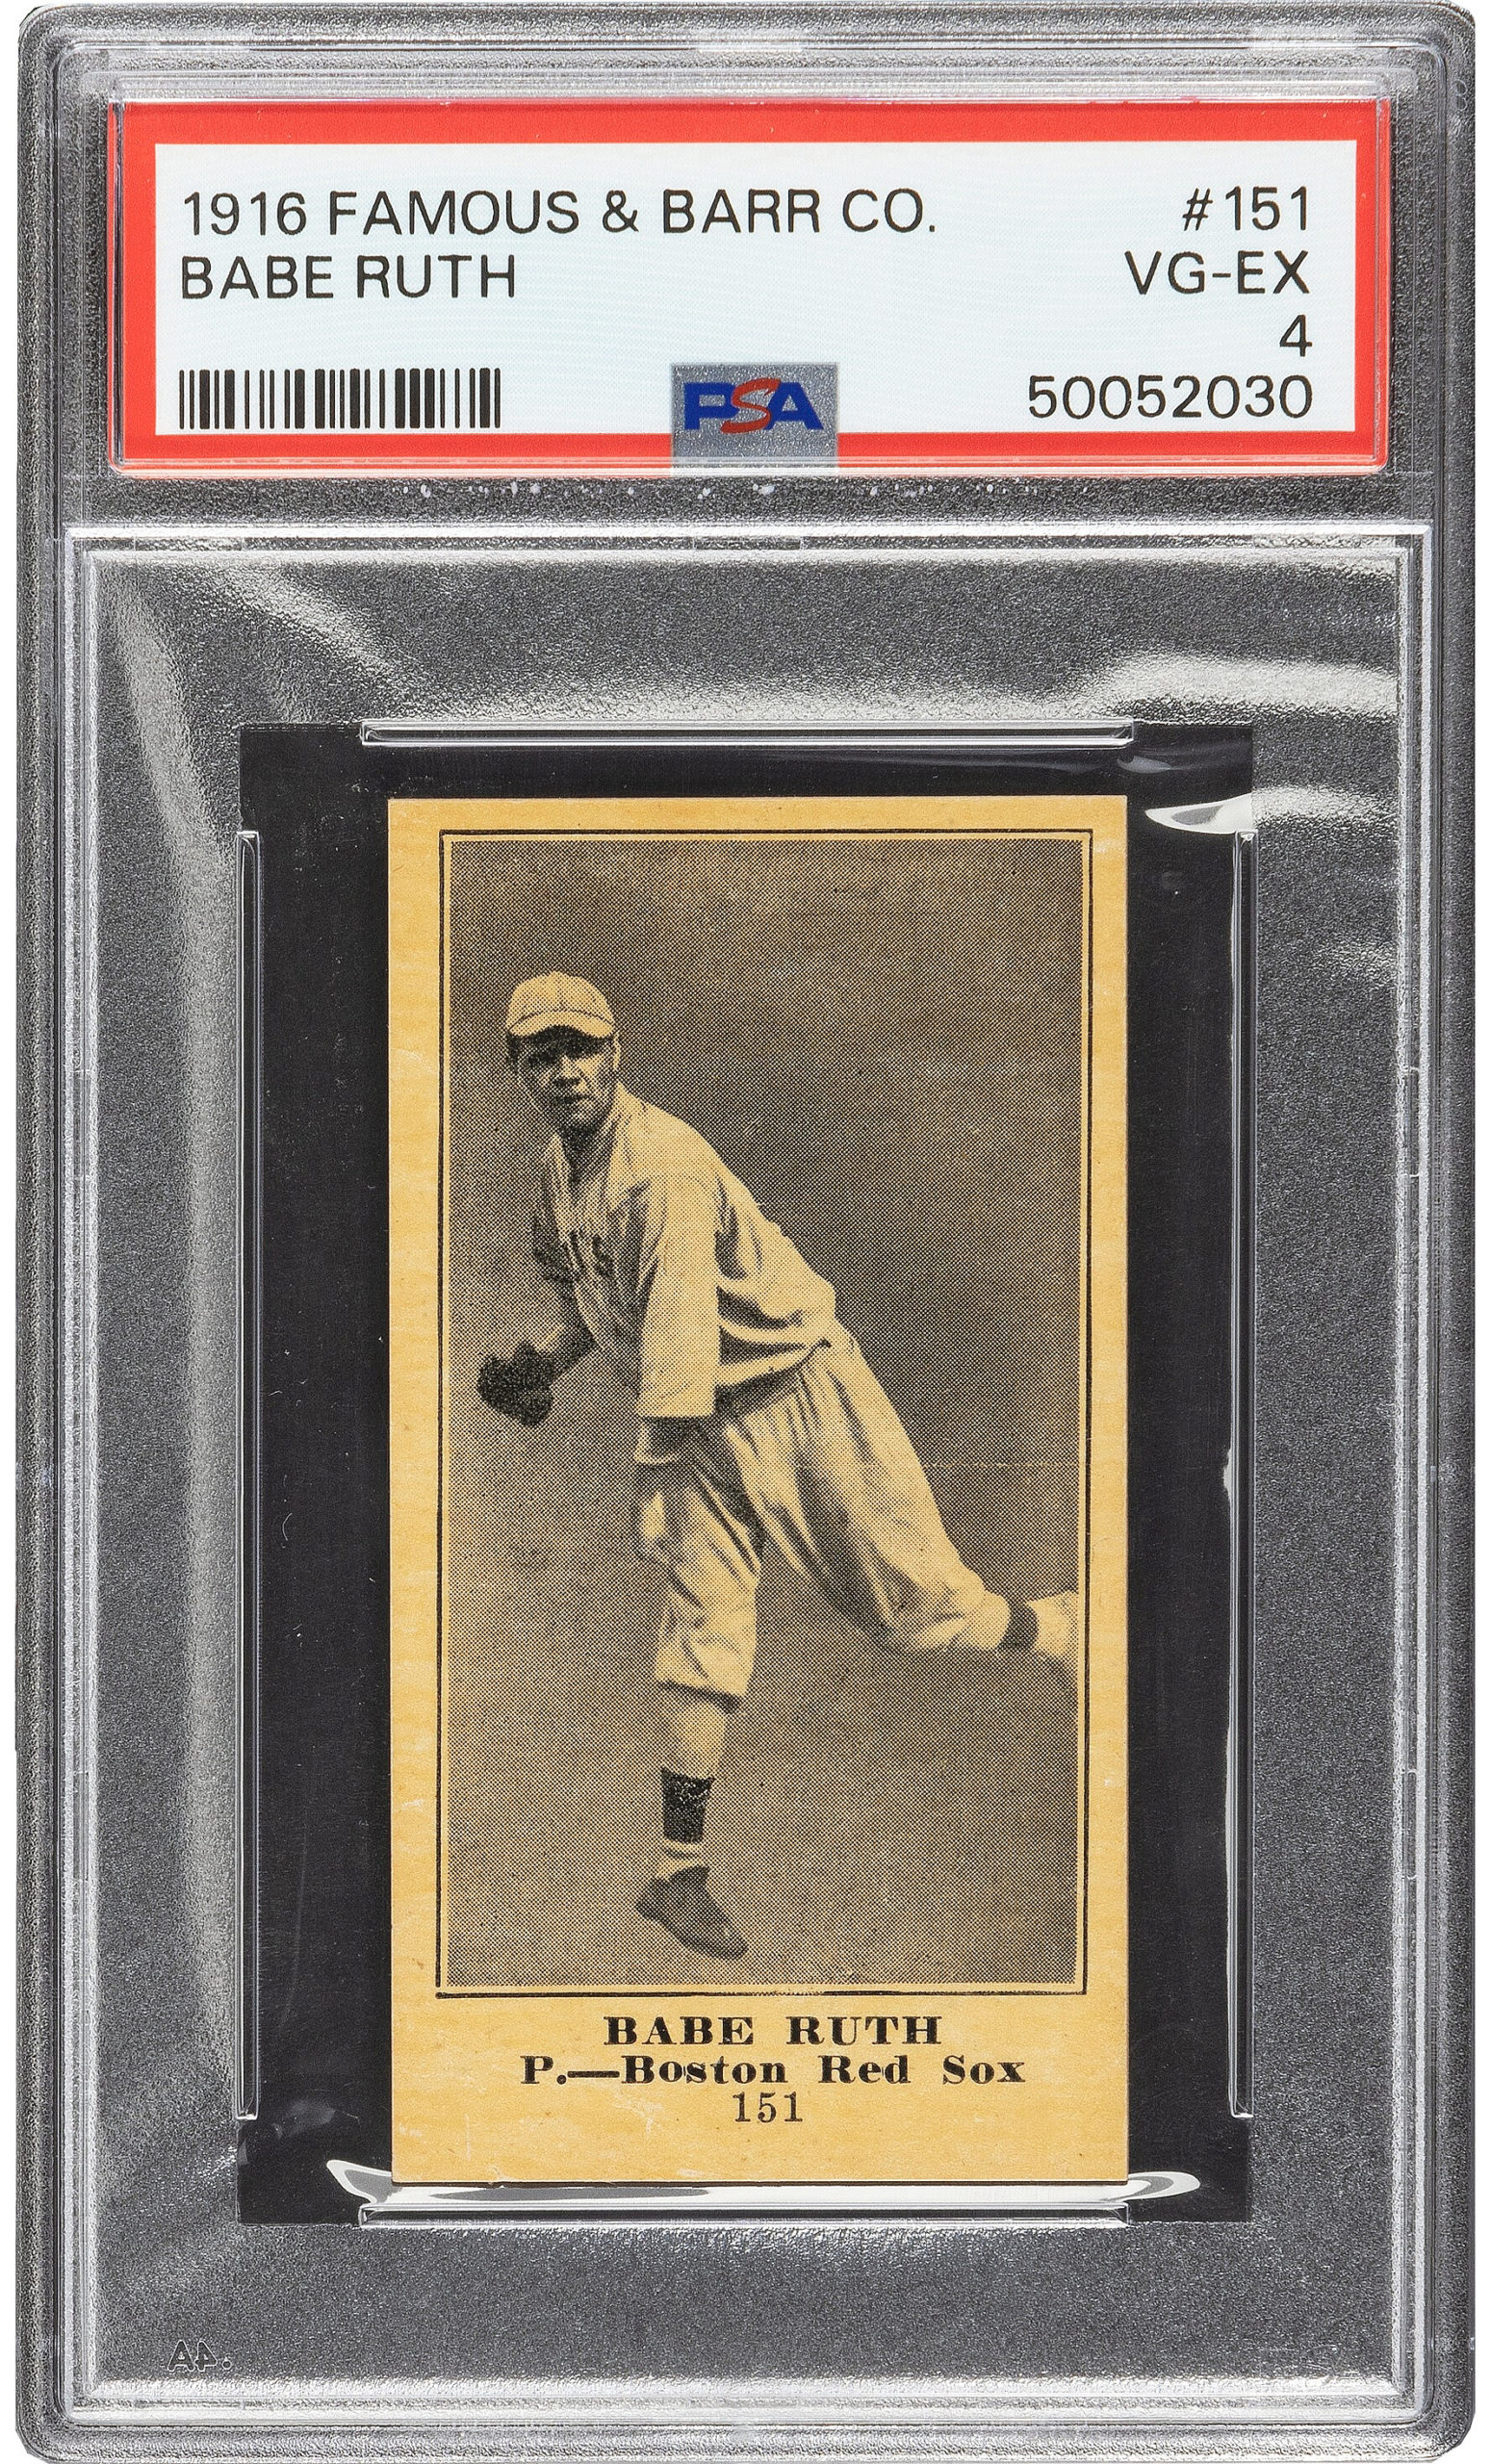 Heritage Hits Home Run With Babe Ruth Card - Antiques And The Arts